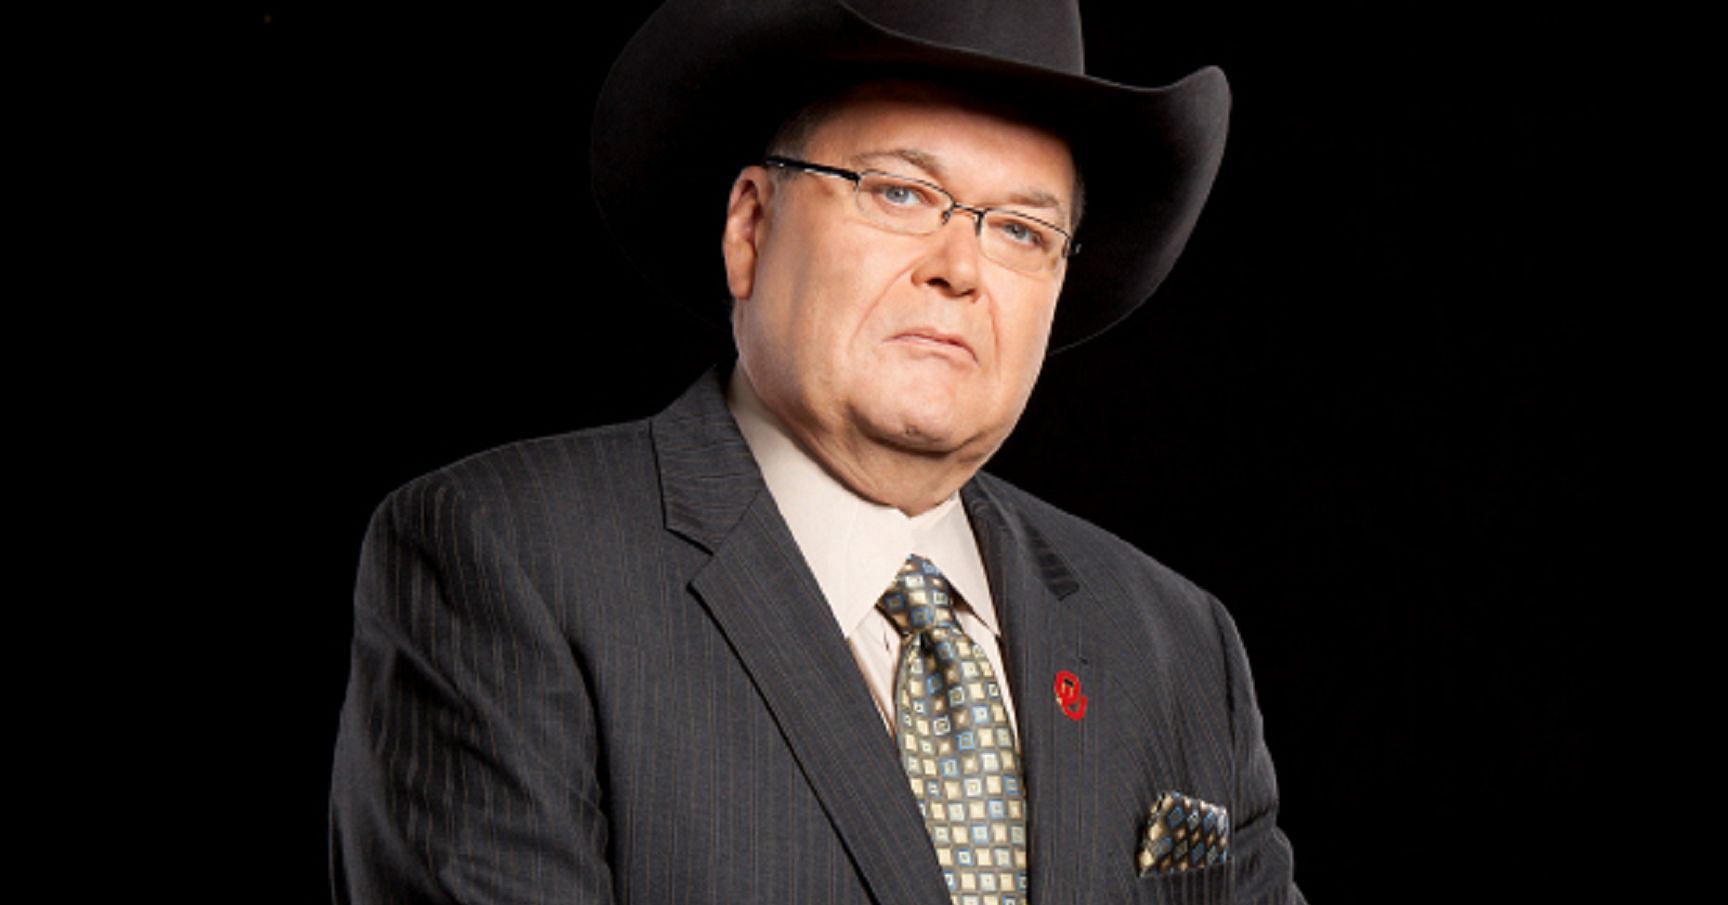 Jim Ross is currently signed to AEW